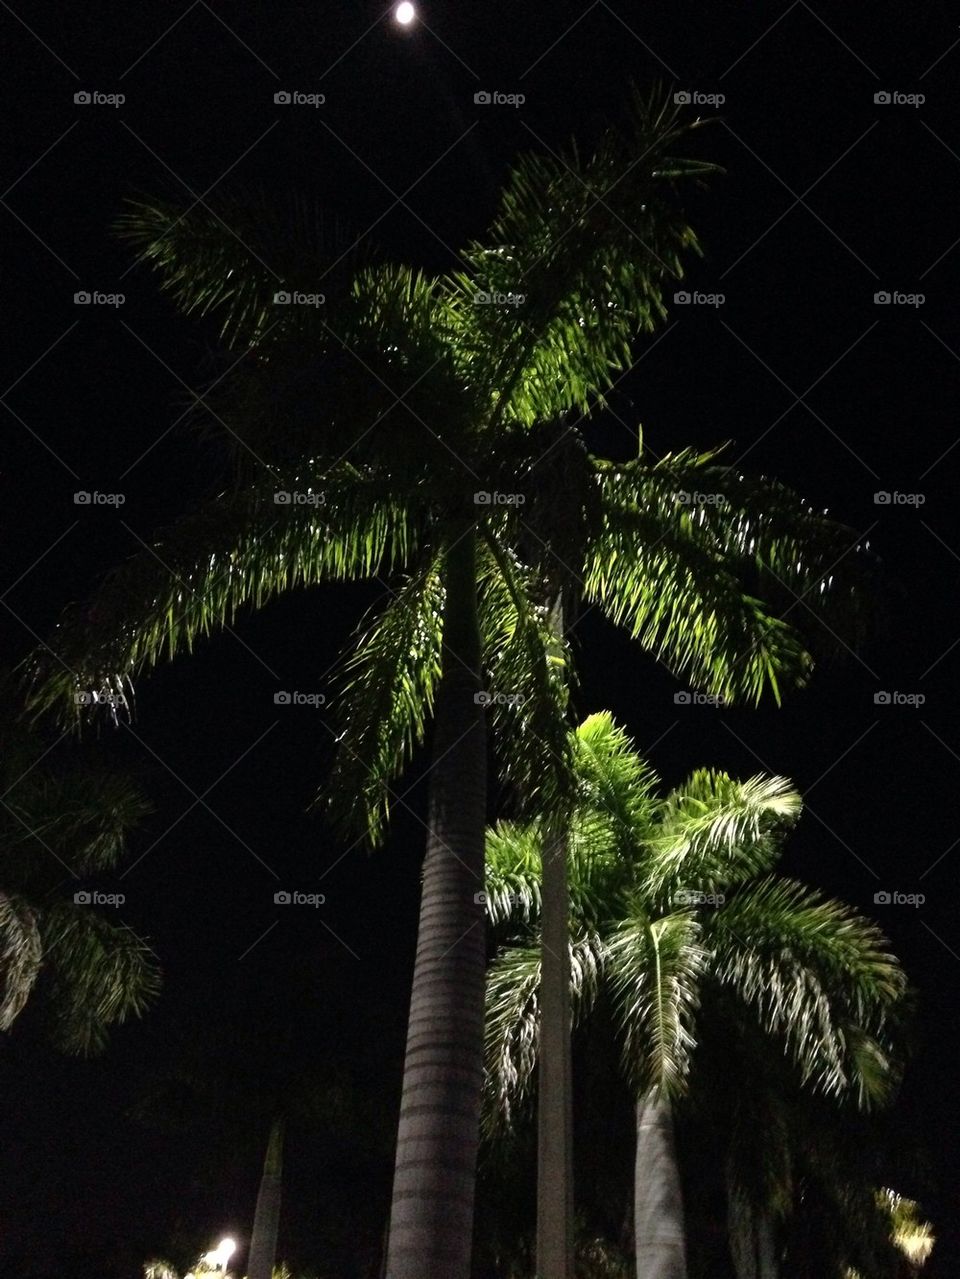 Moon over palms